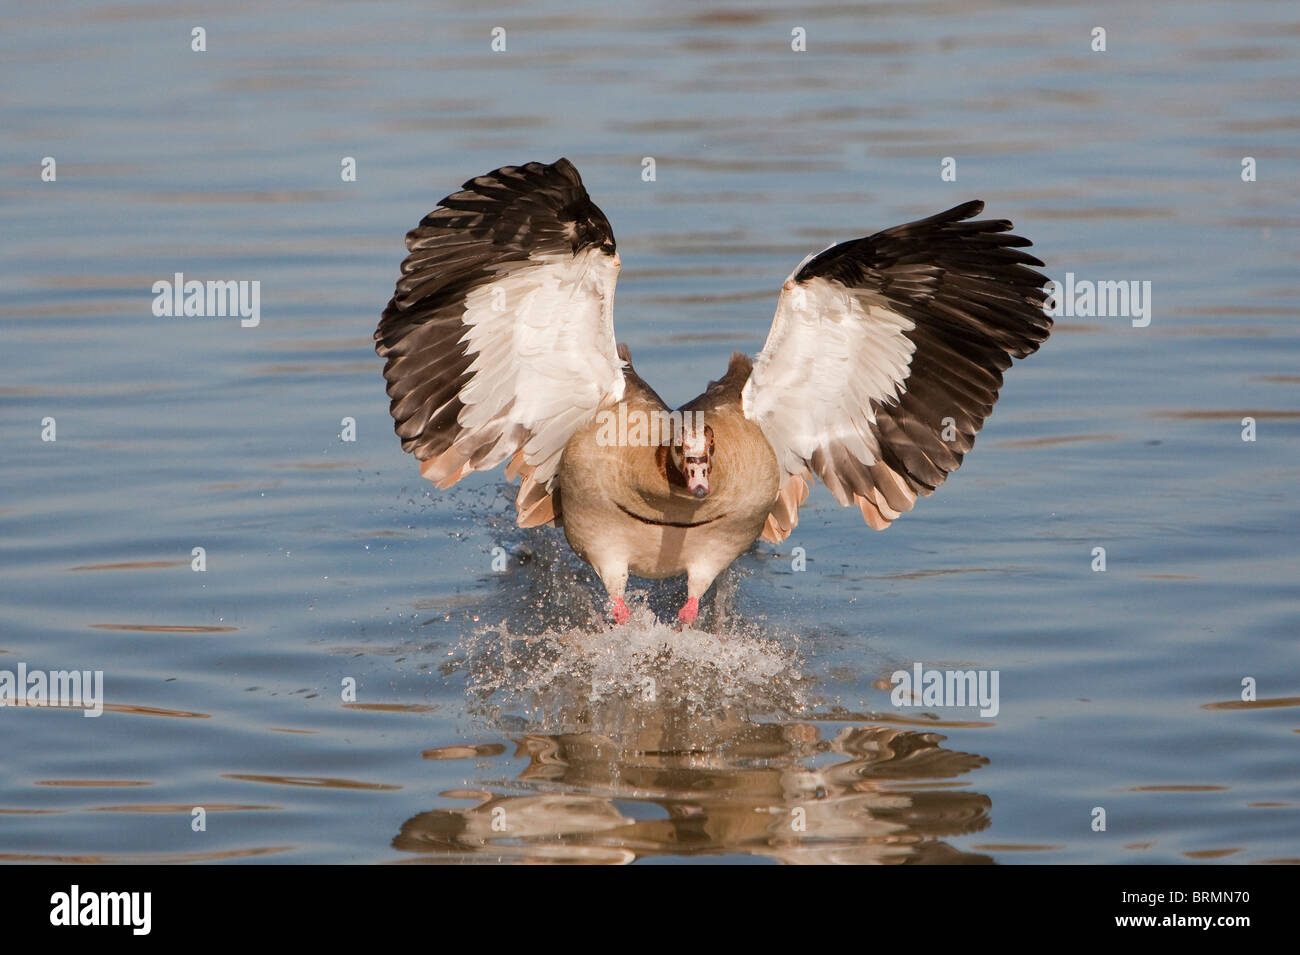 Egyptian Goose coming in to land on water Stock Photo